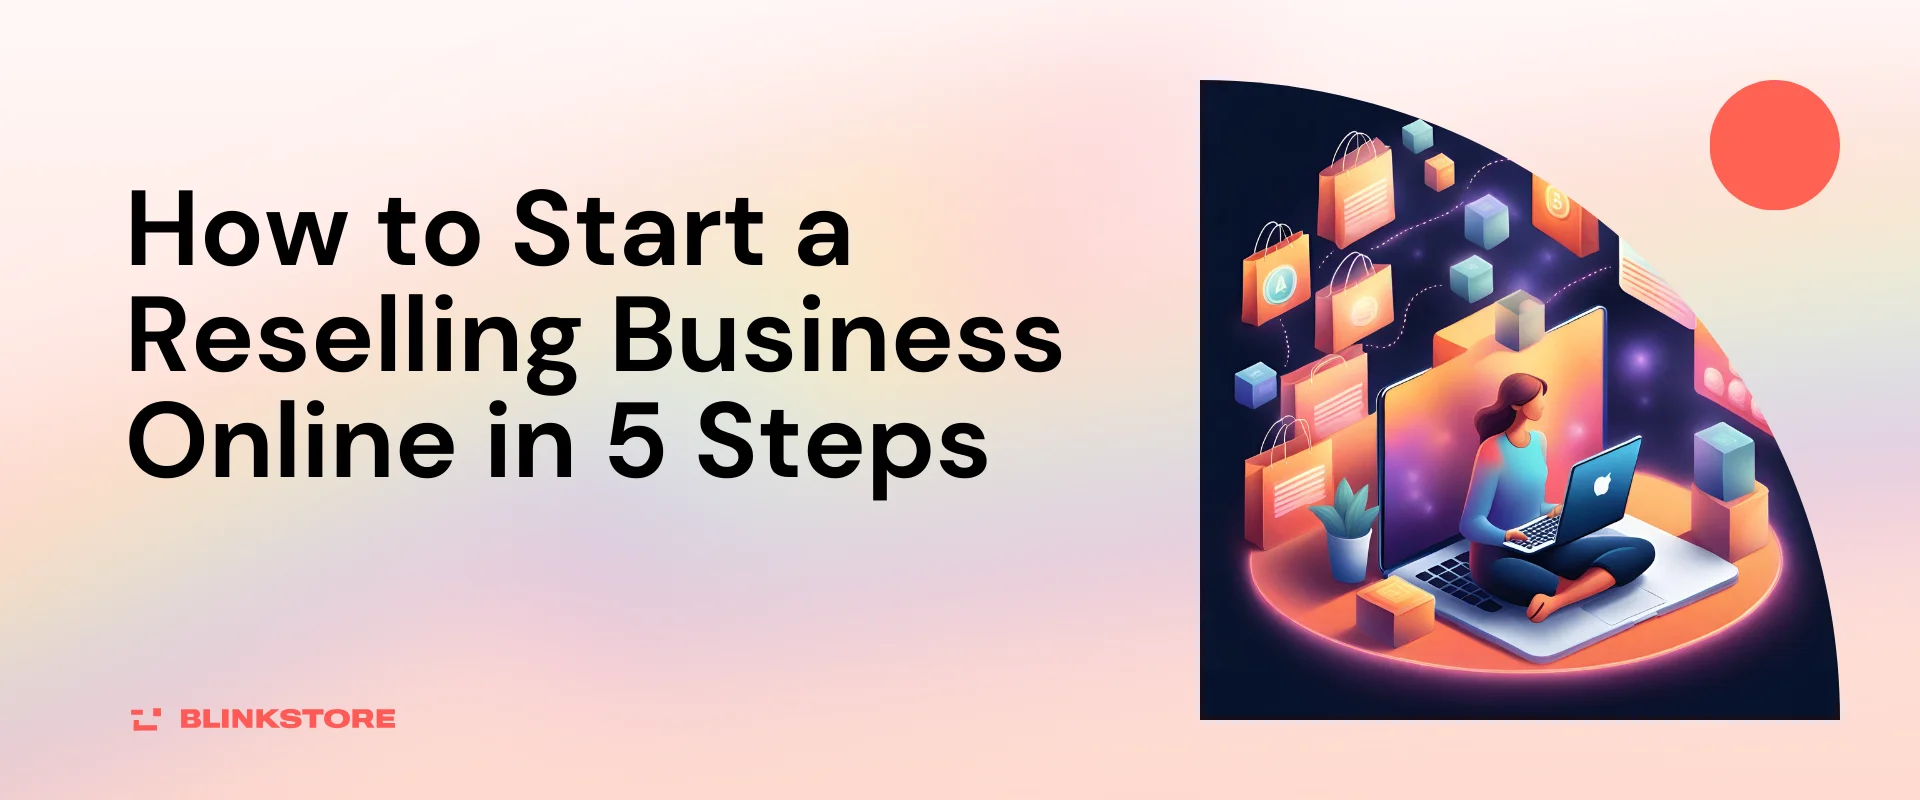 How to Start a Reselling Business